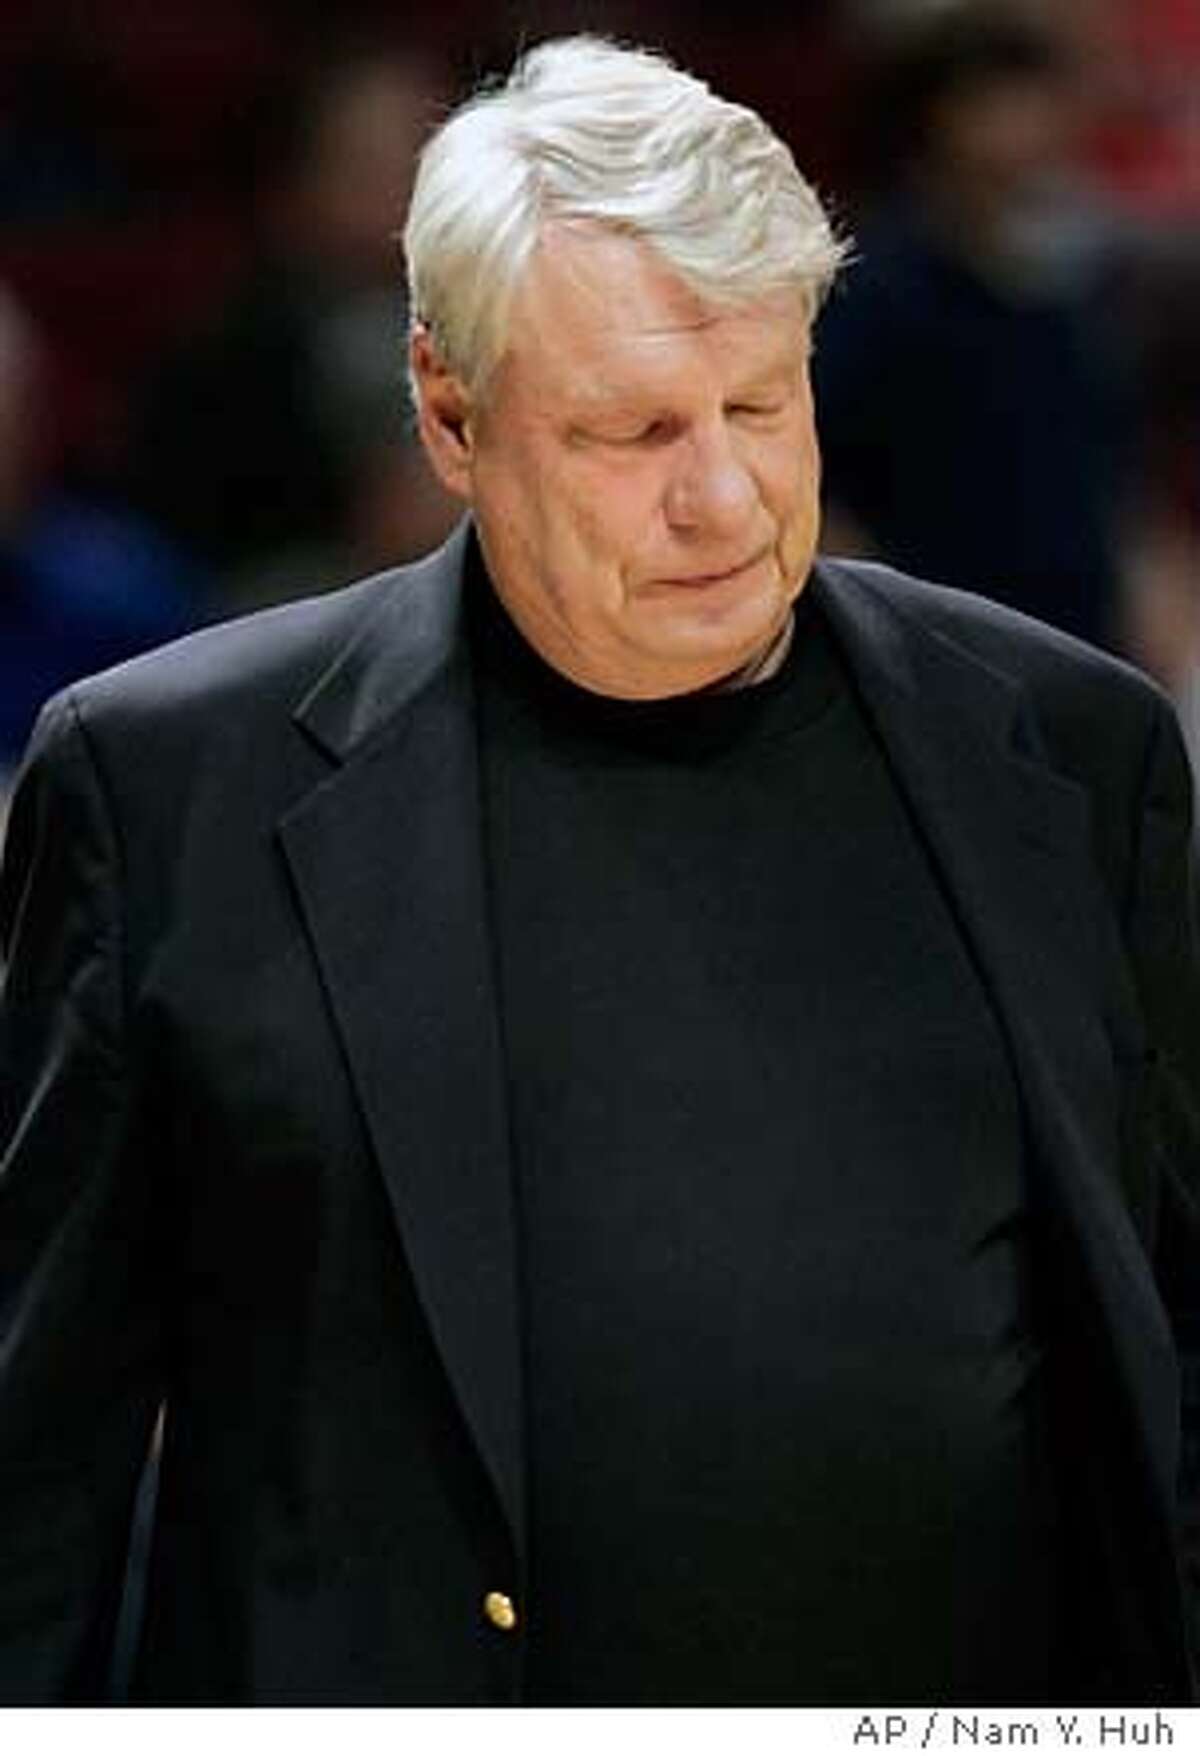 Golden State Warriors coach Don Nelson reacts as he watches his team play during the fourth quarter of an NBA basketball game against Chicago Bulls in Chicago, Wednesday, Feb. 28, 2007. The Bulls won the game, 113-83.(AP Photo/Nam Y. Huh)